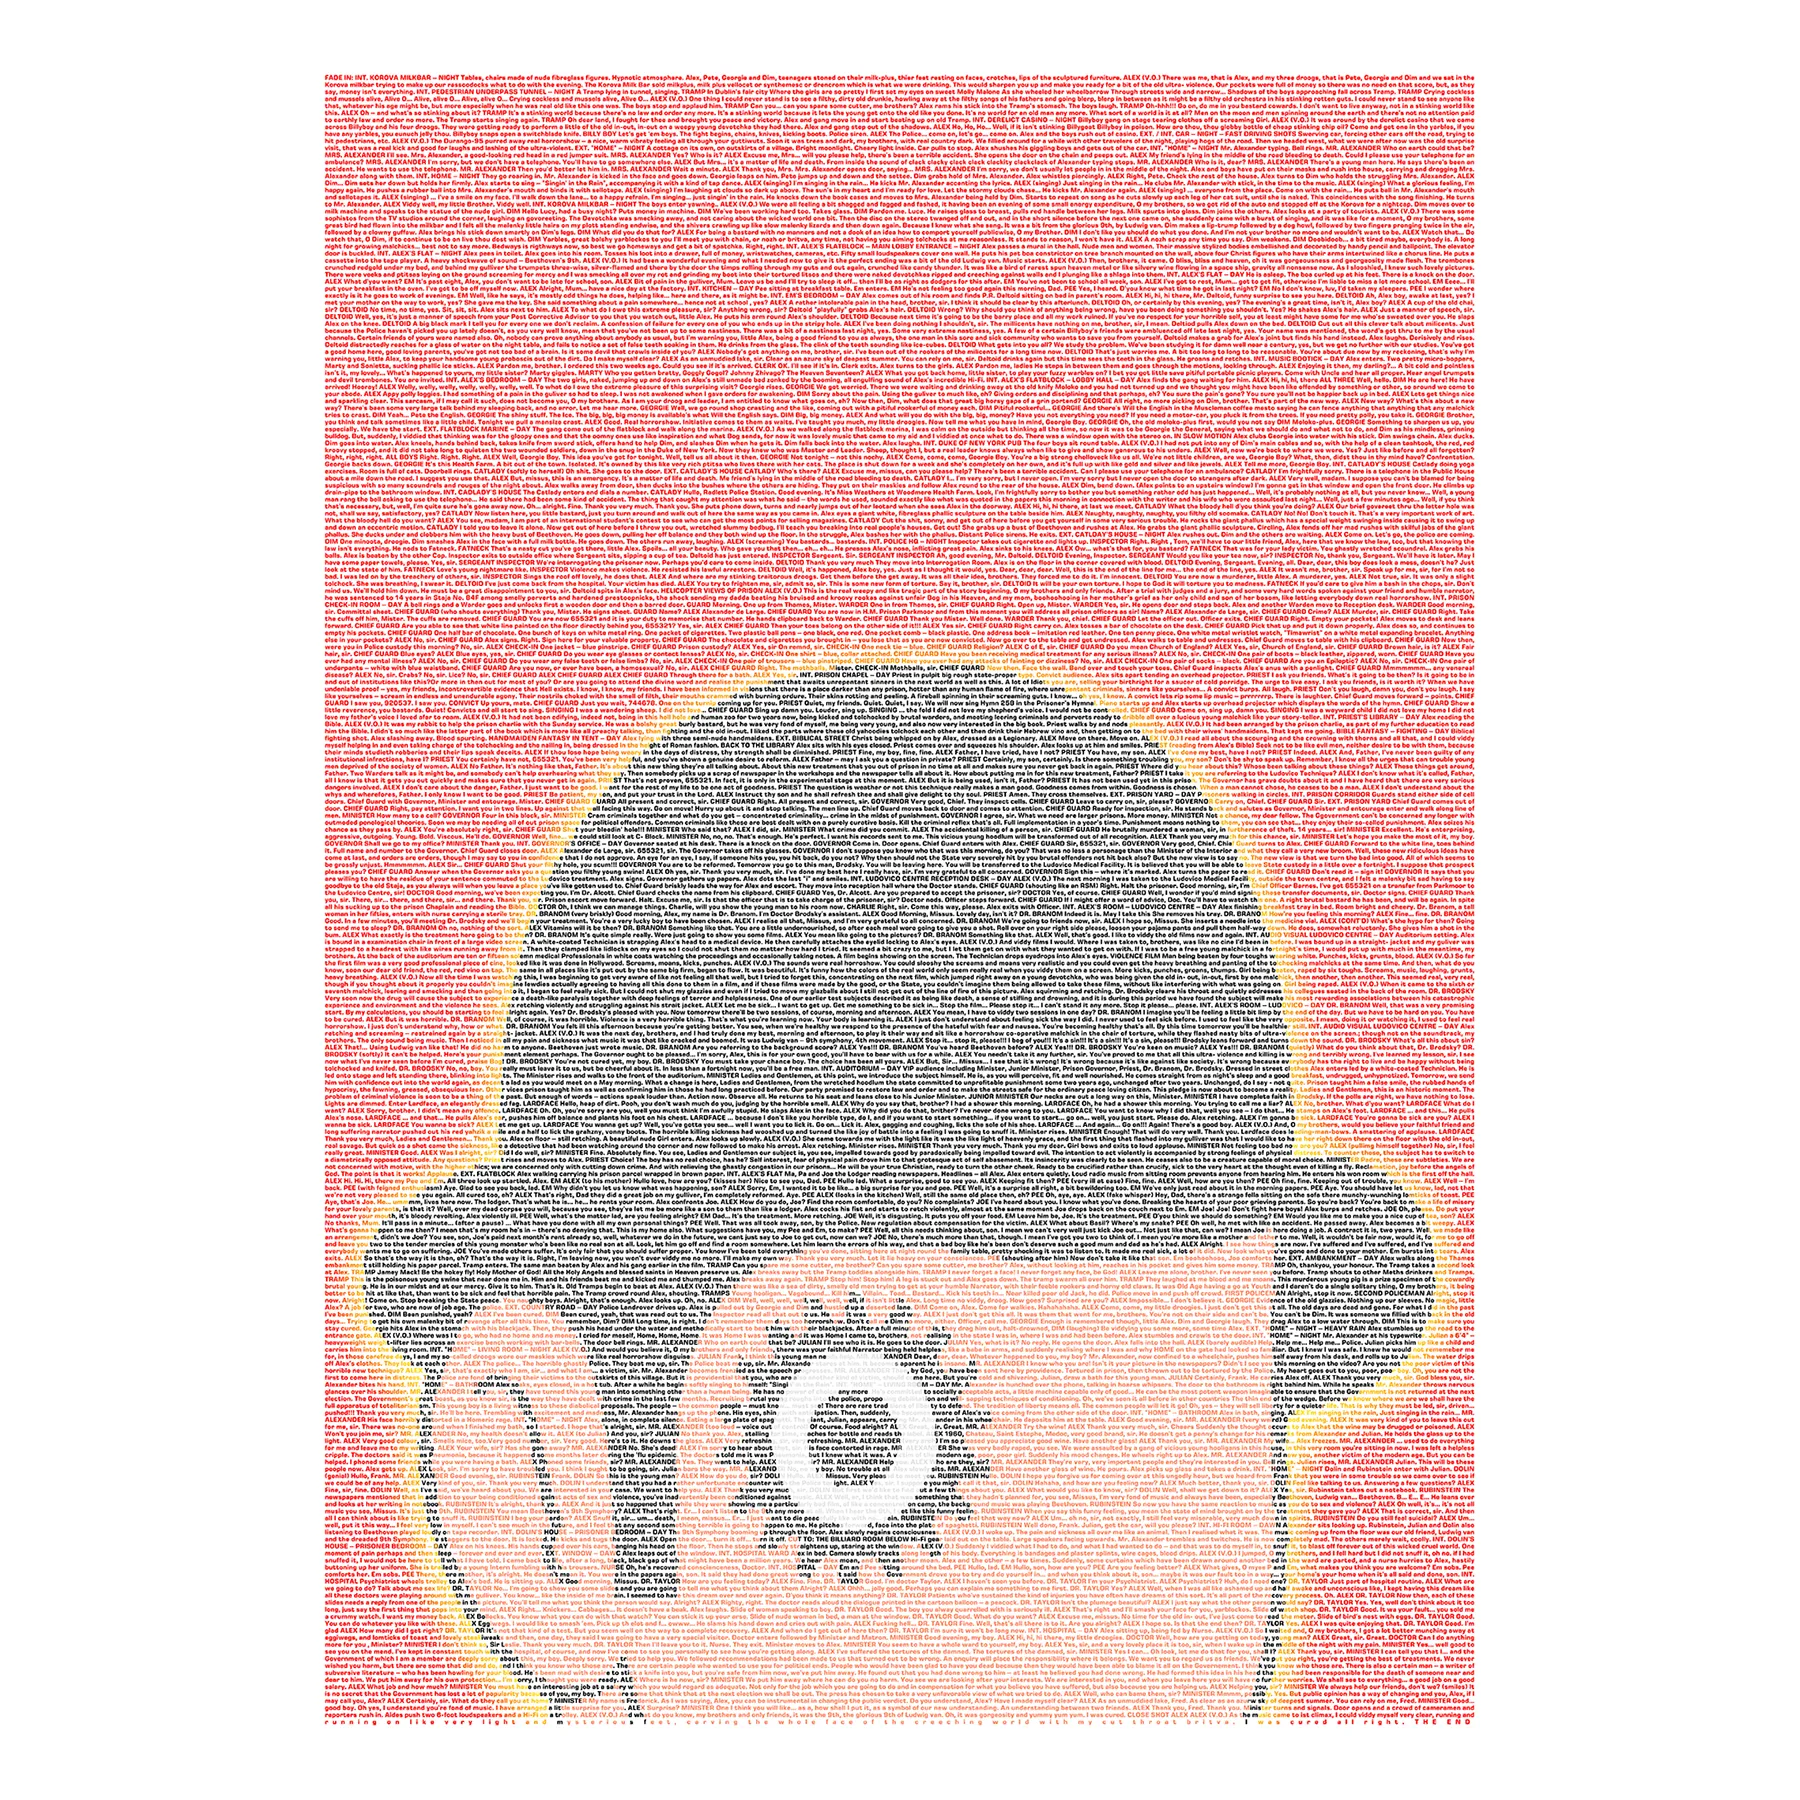 A Clockwork Orange movie poster, created from the screenplay